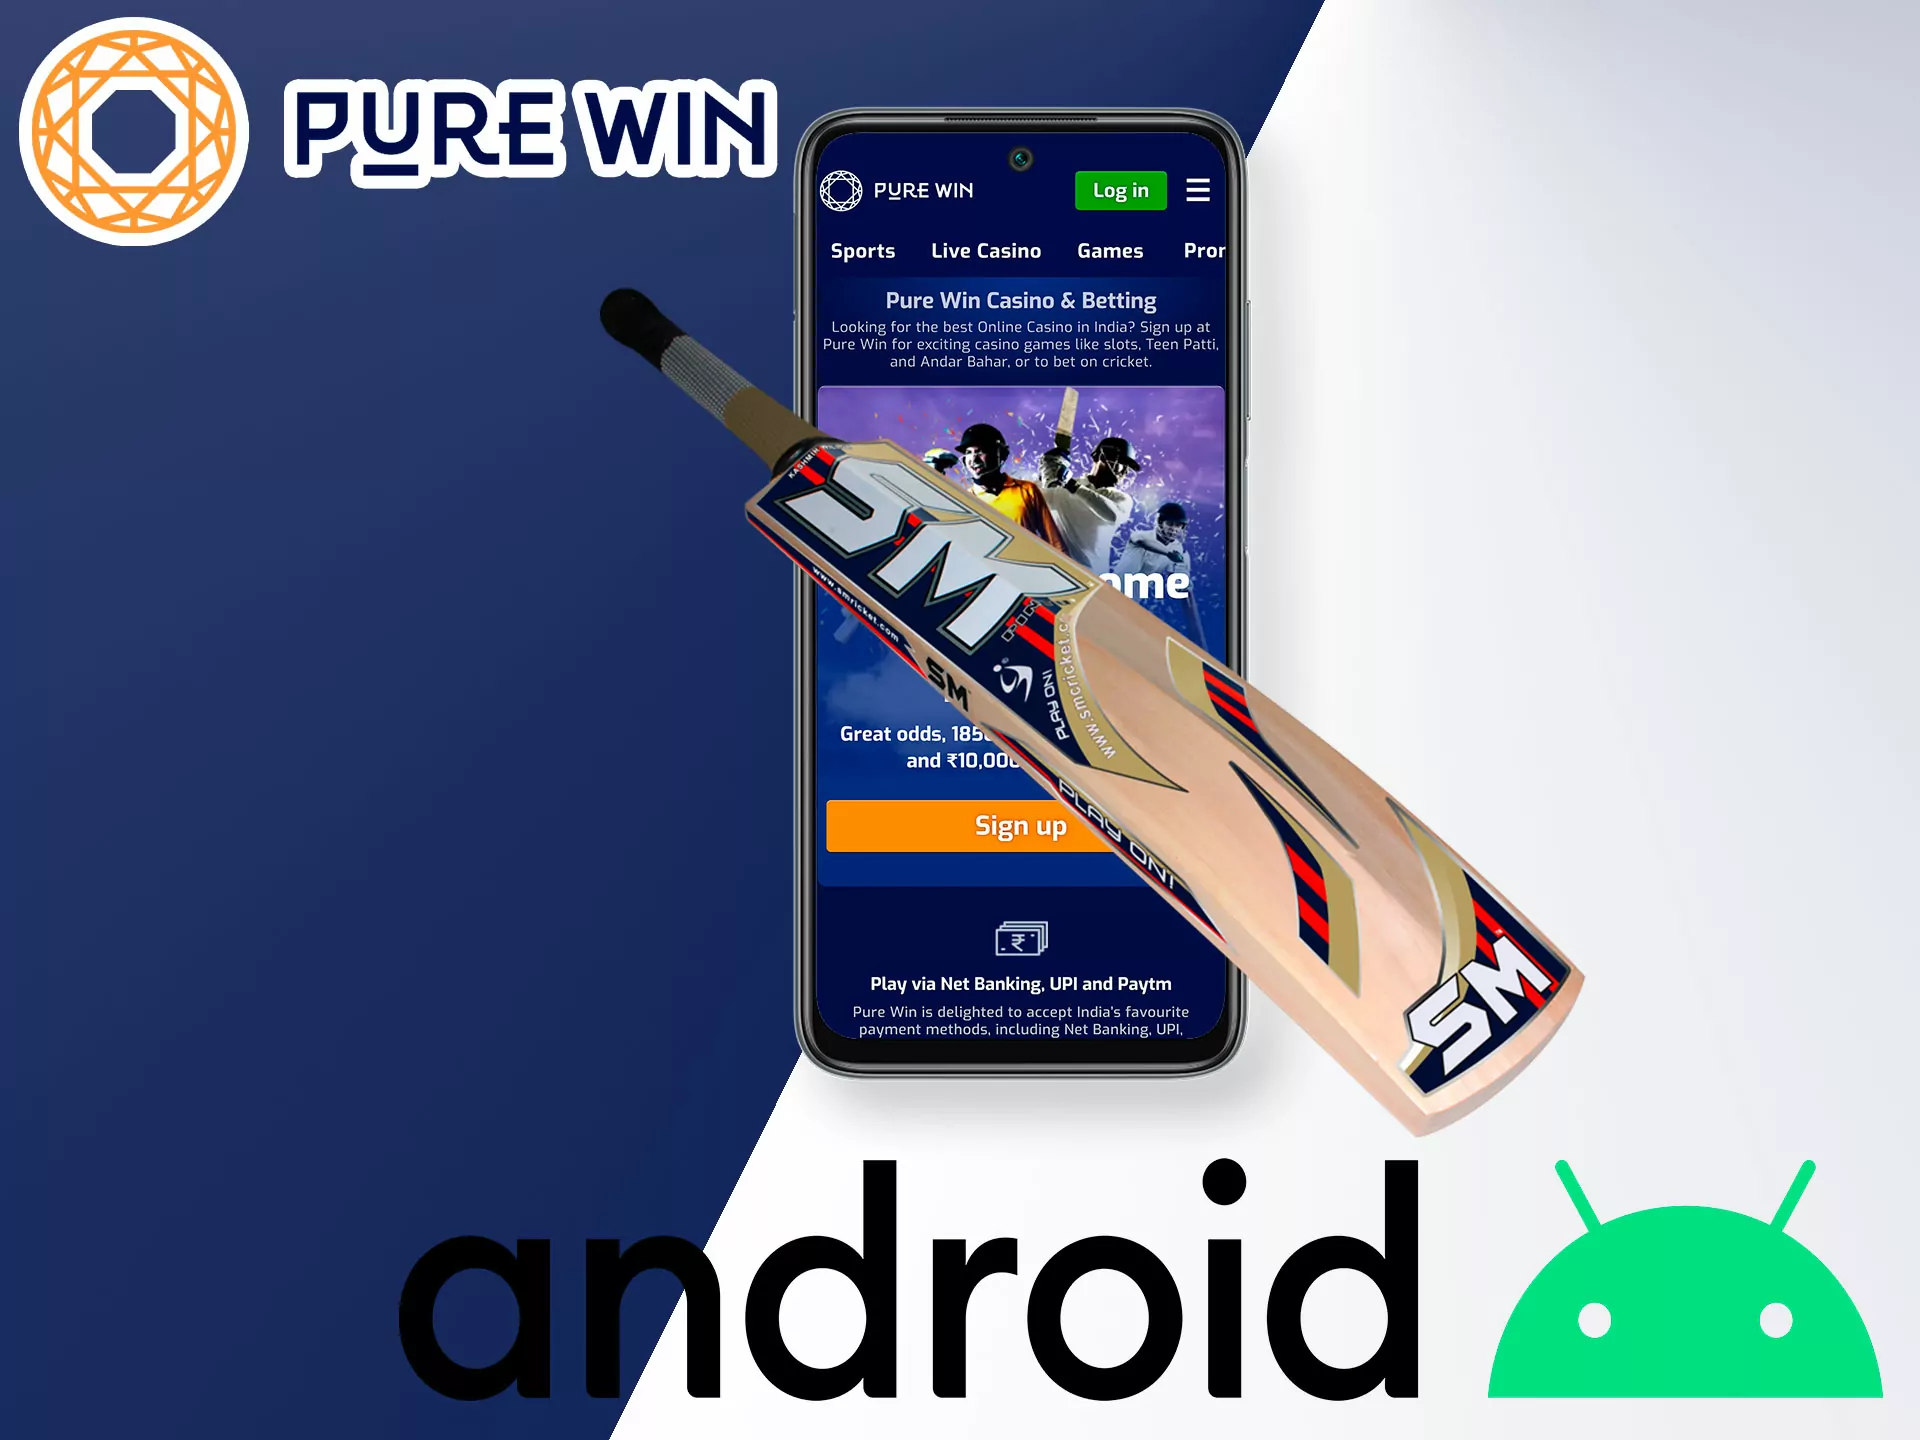 Unfortunately, many betting apps cannot be obtained from the Play Store, Pure Win is no exception.